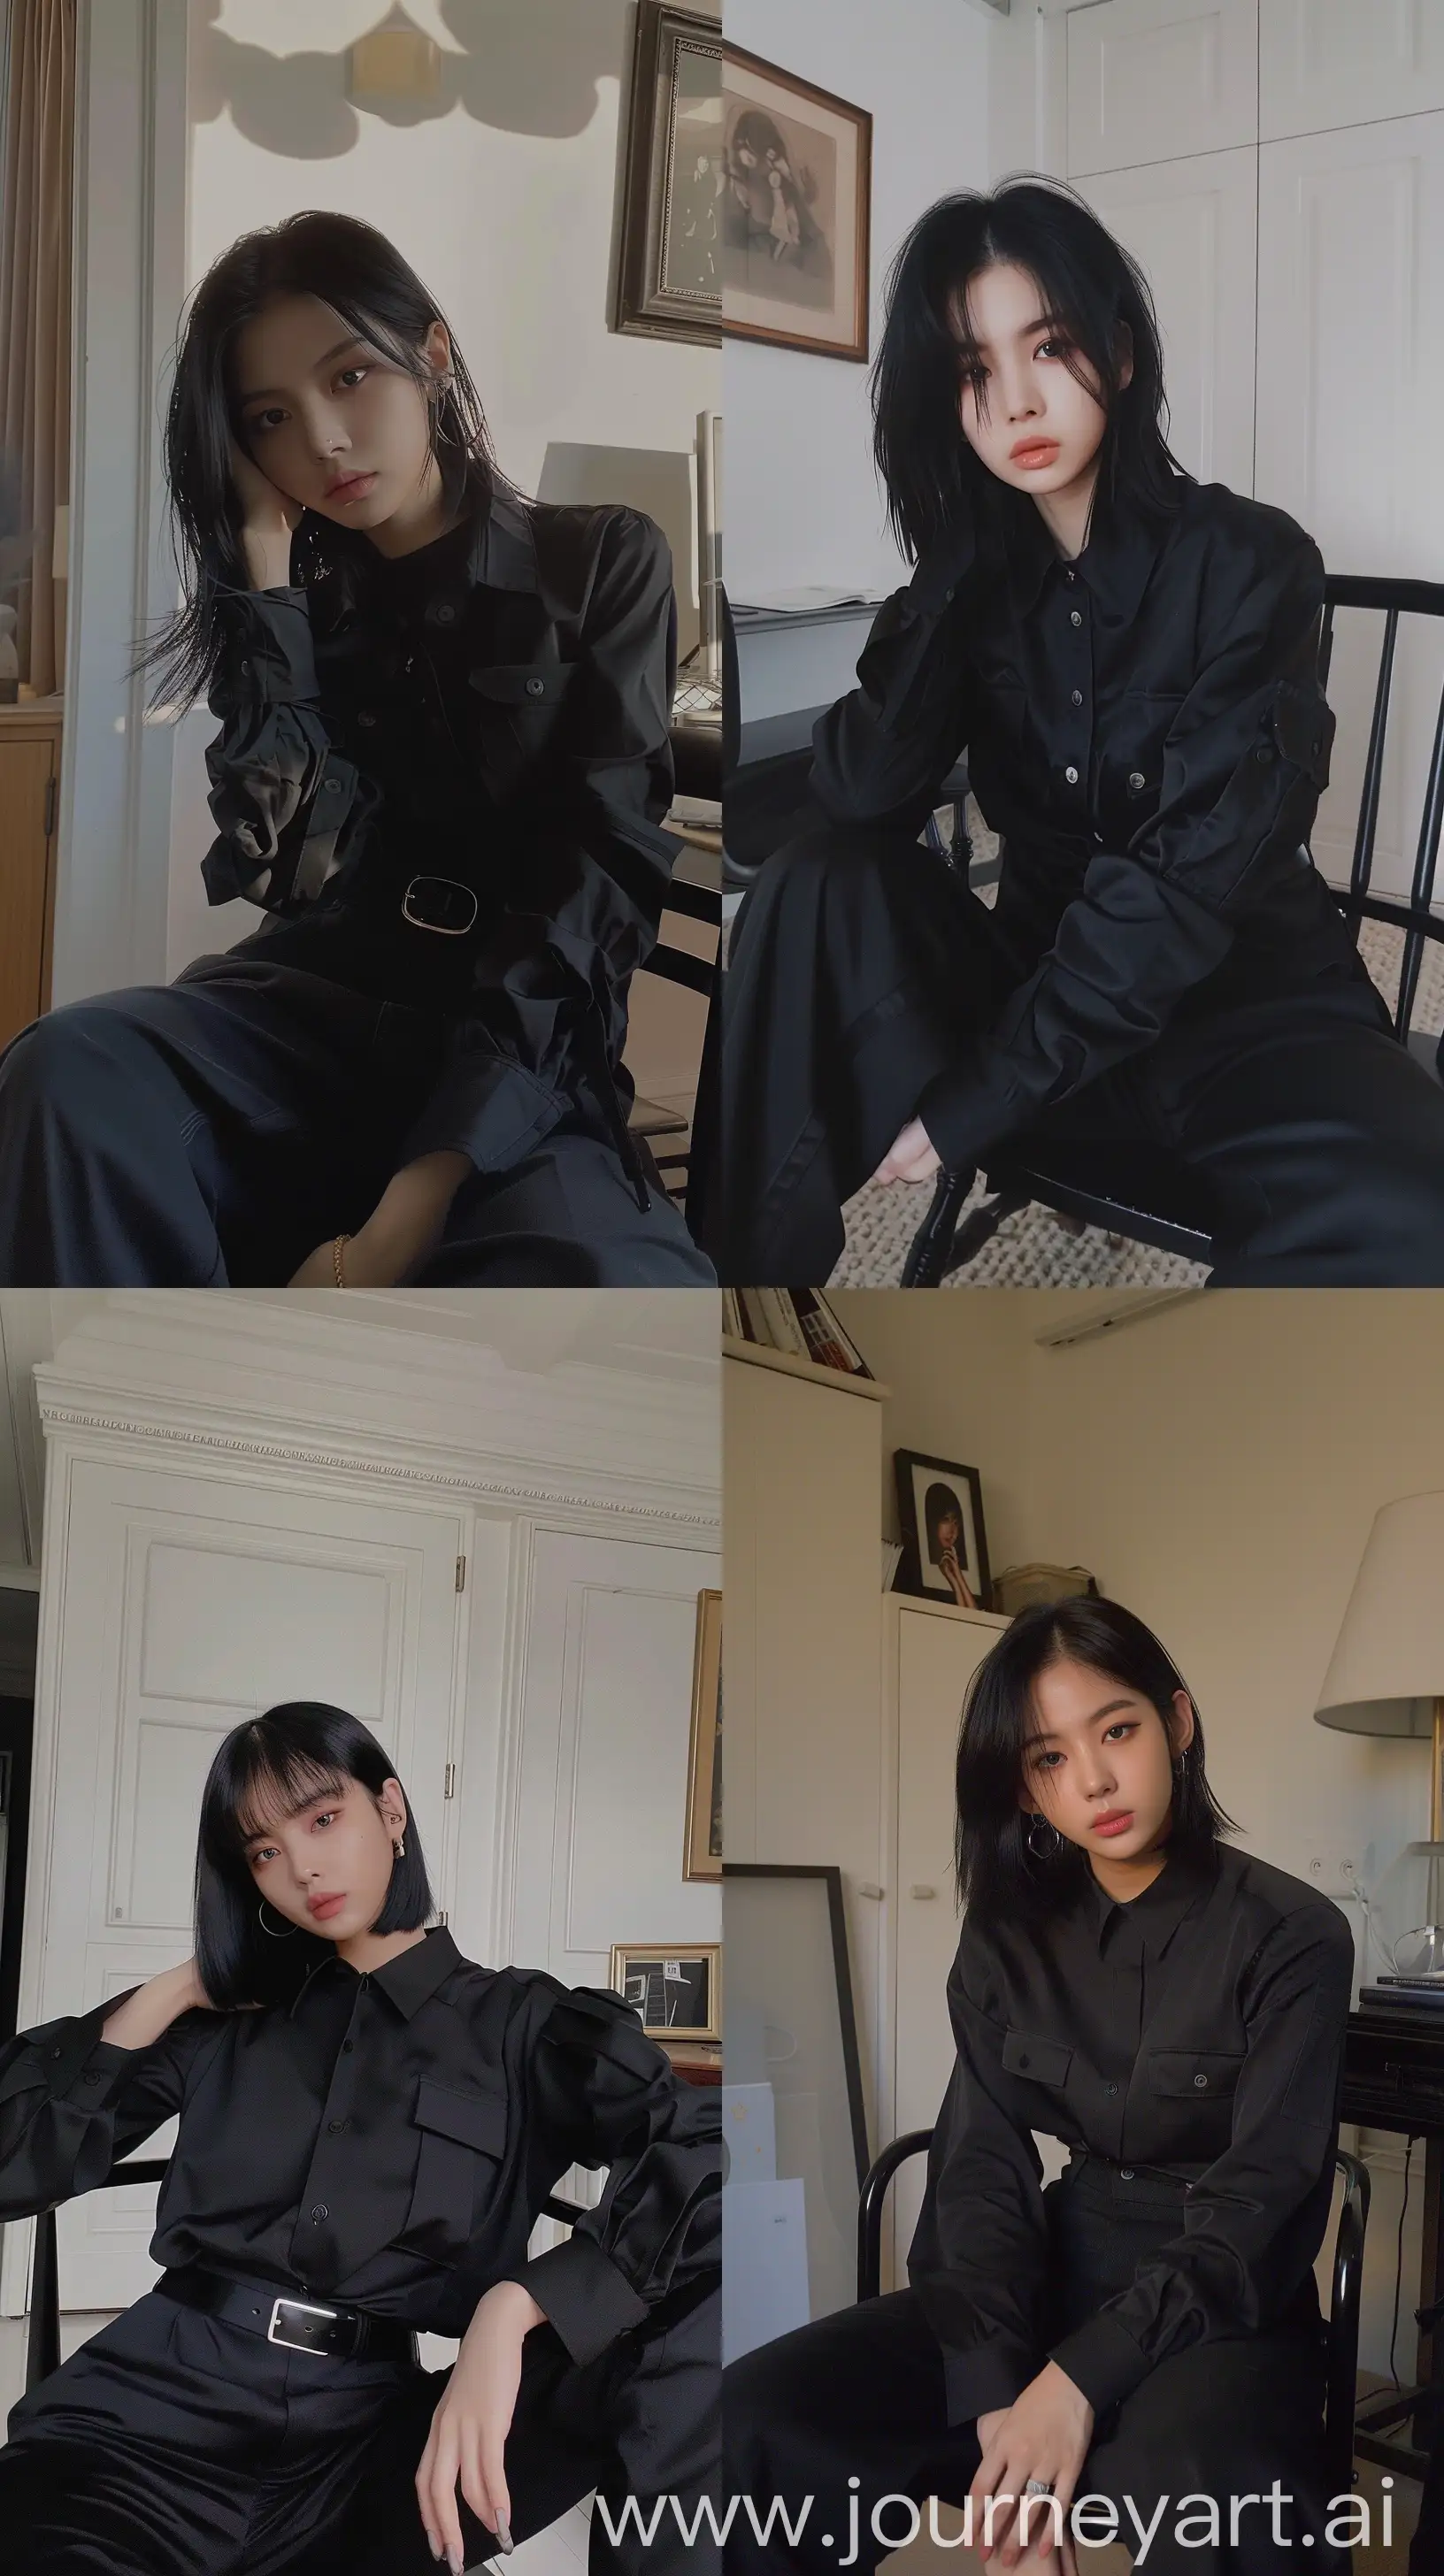 Blackpinks-Jennie-Captures-Aesthetic-Selfie-with-Edgy-Wolfcut-and-Chic-Monochrome-Style